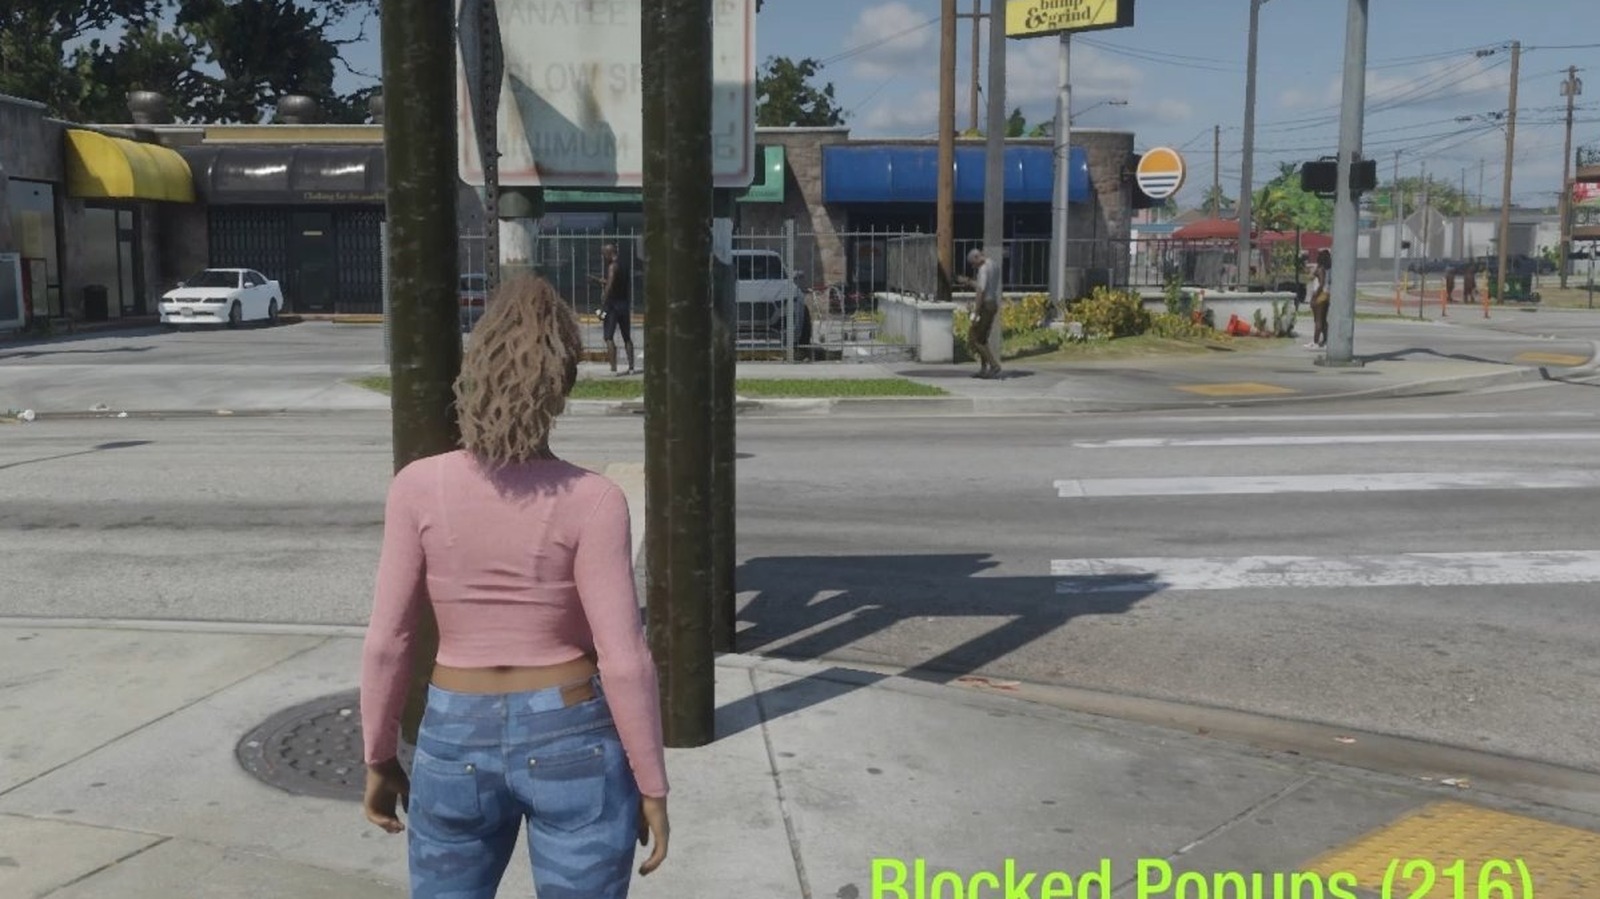 We Finally Got Our First Look At GTA 6's Main Character